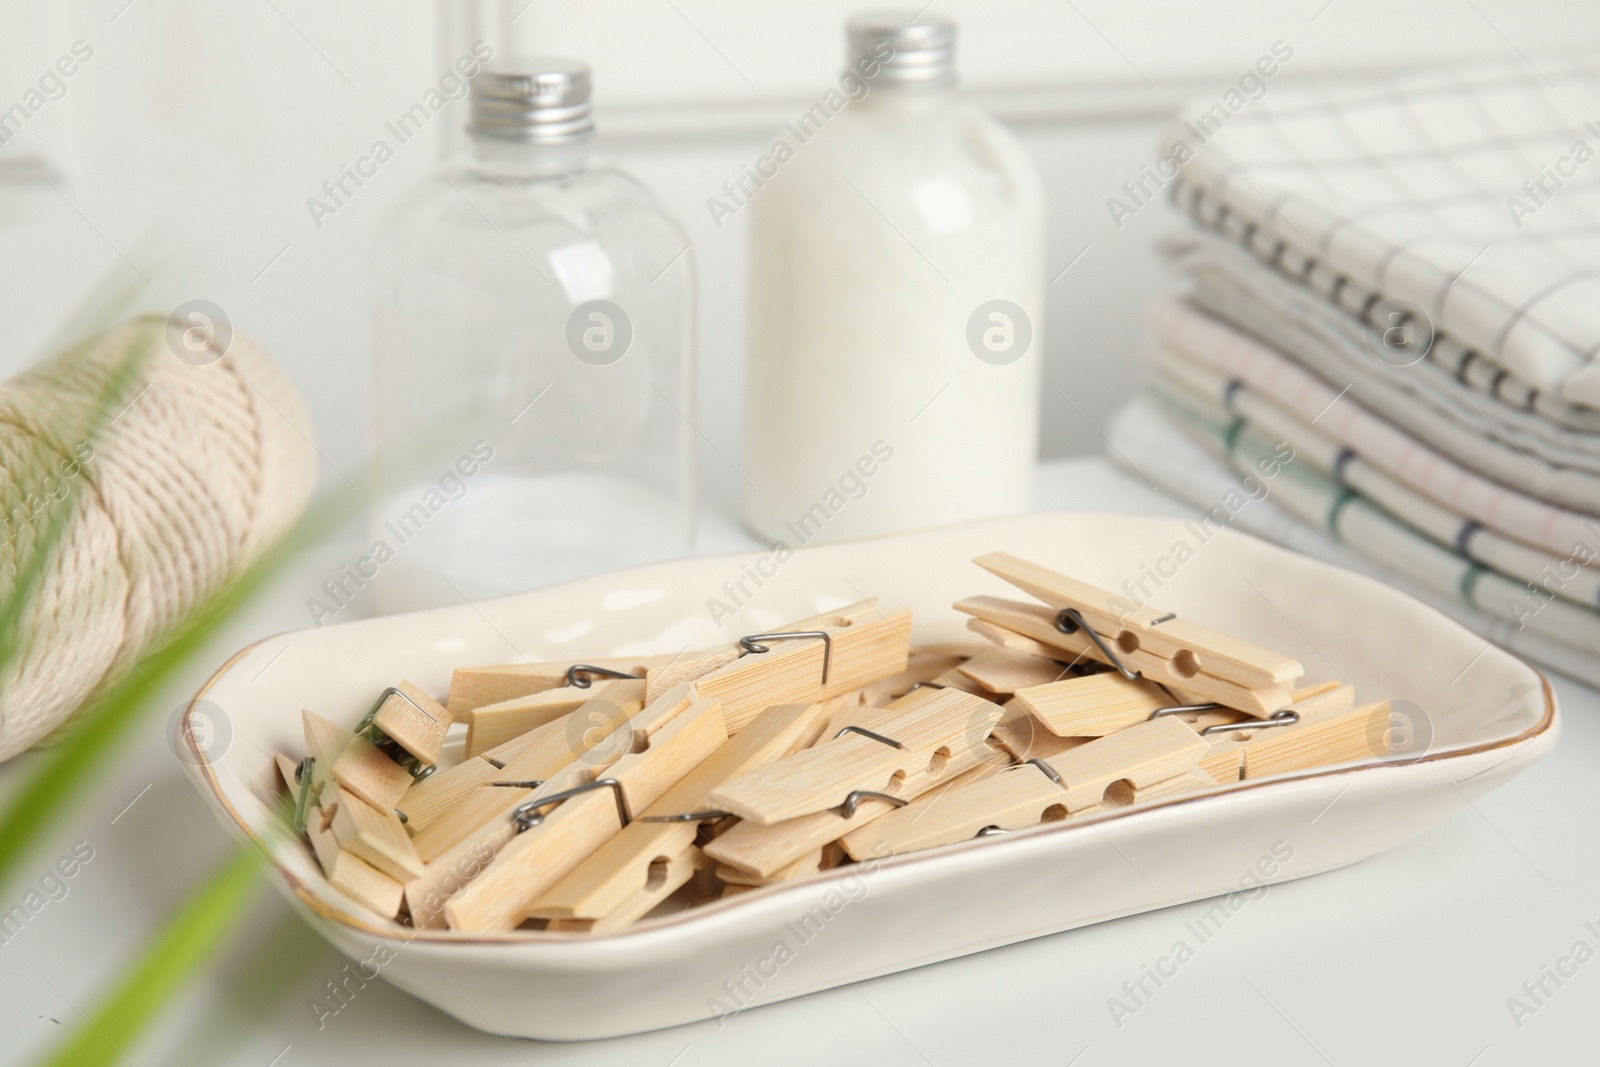 Photo of Many wooden clothespins in bowl on white table